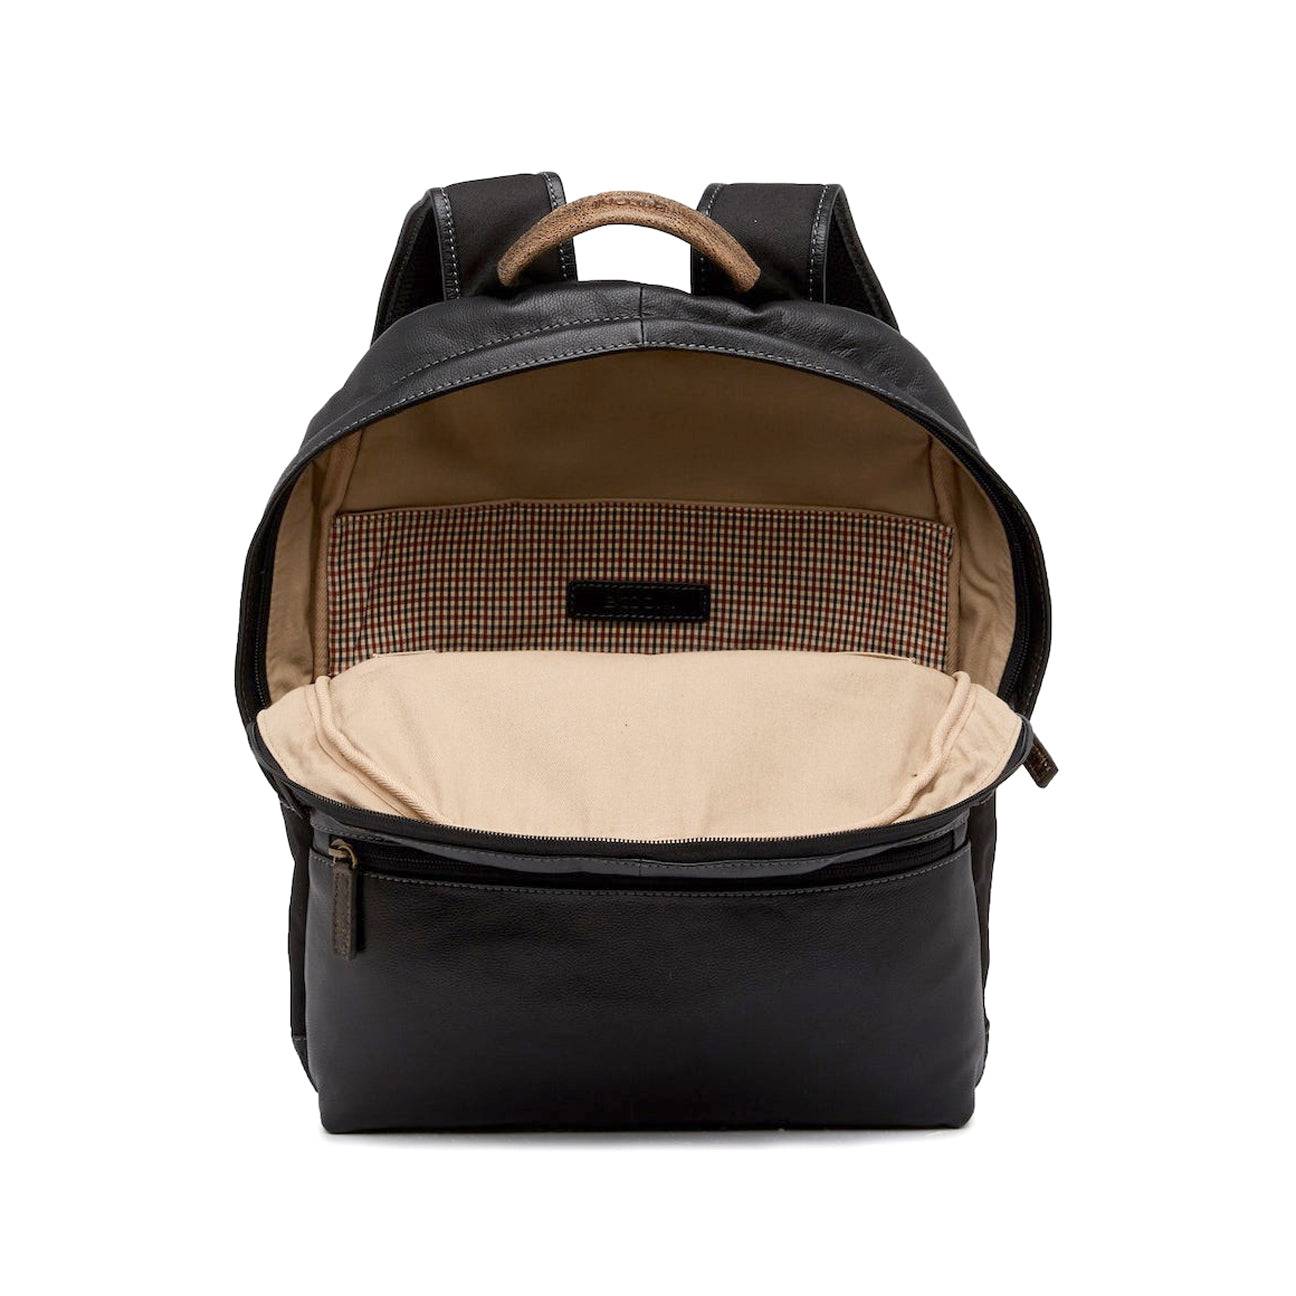 a black backpack with a tan lining